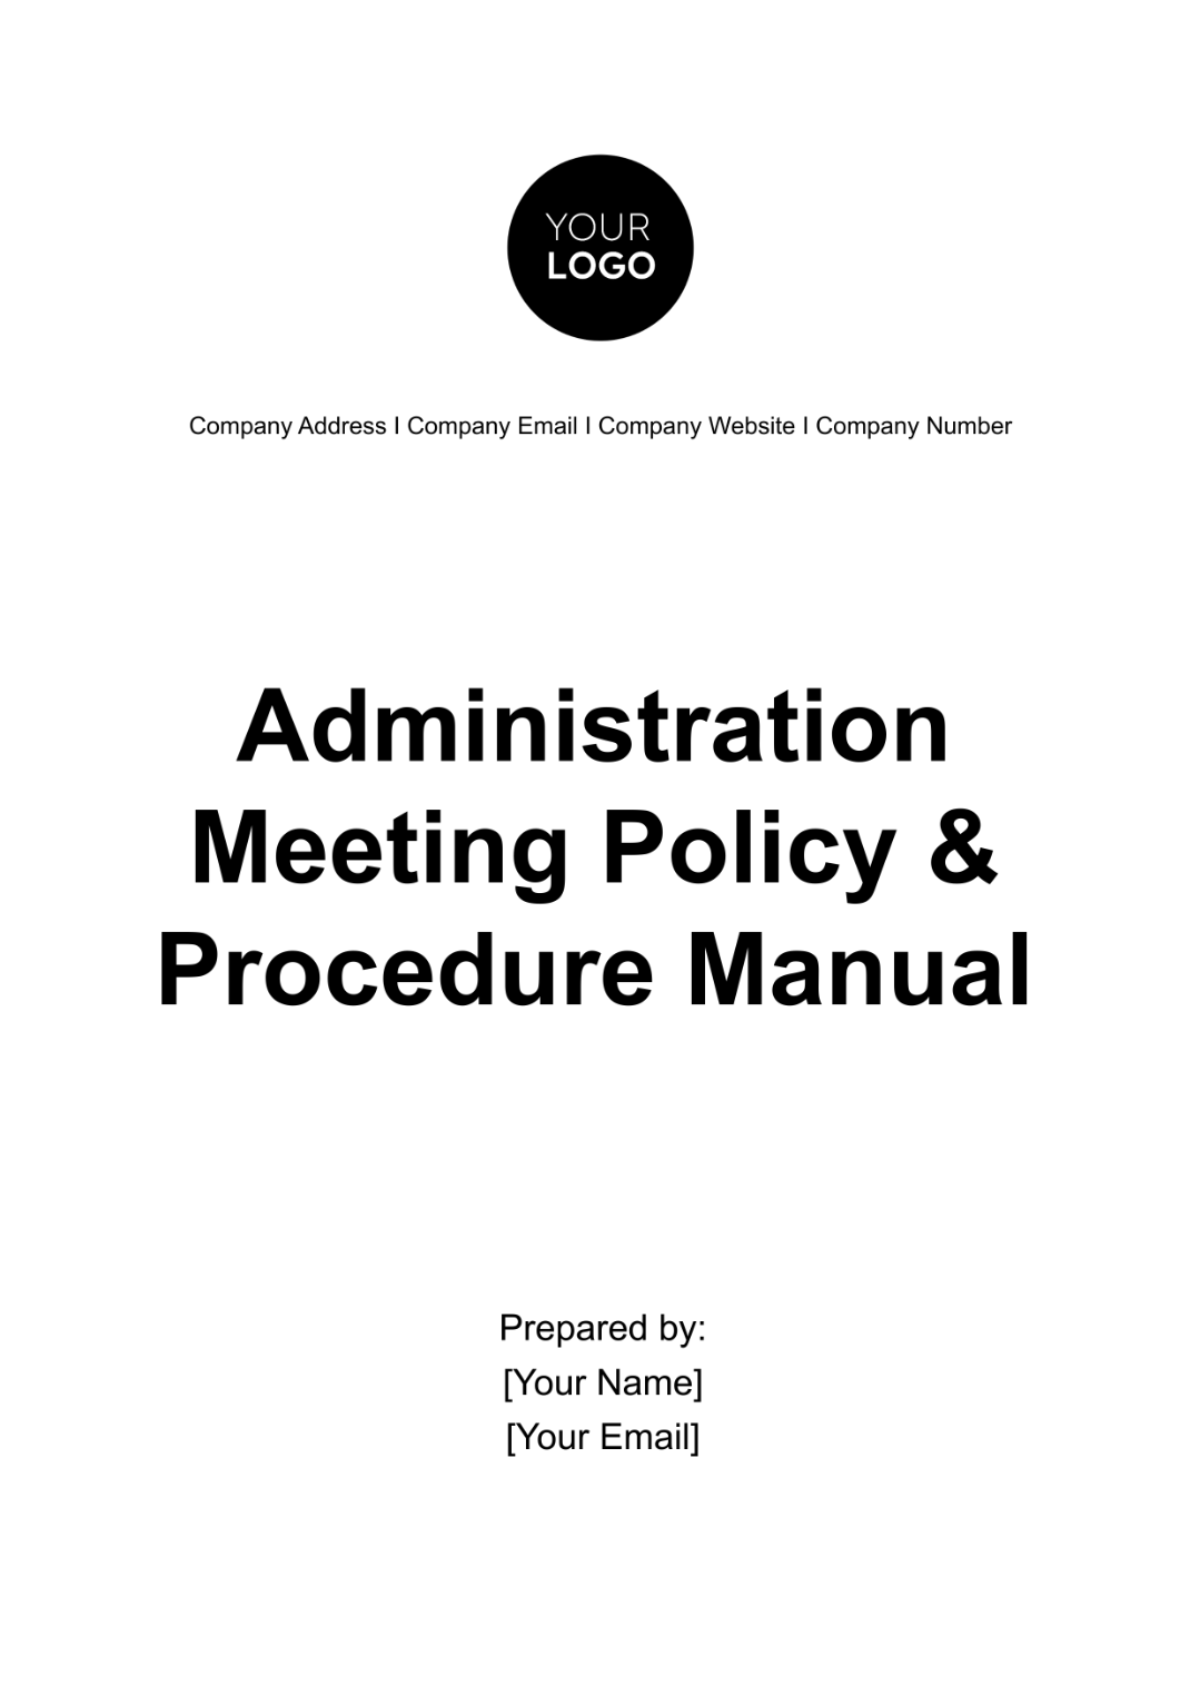 Free Administration Meeting Policy & Procedure Manual Template